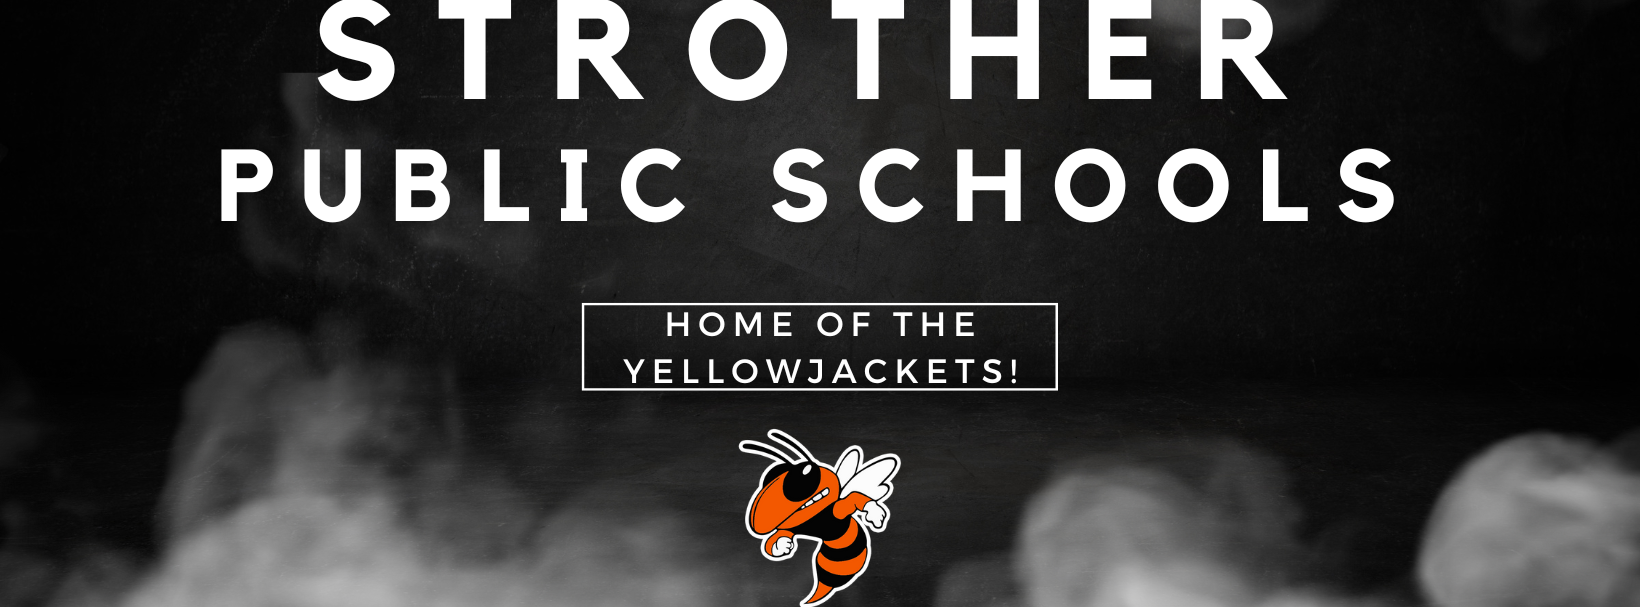 strother public schools with mascot on black background